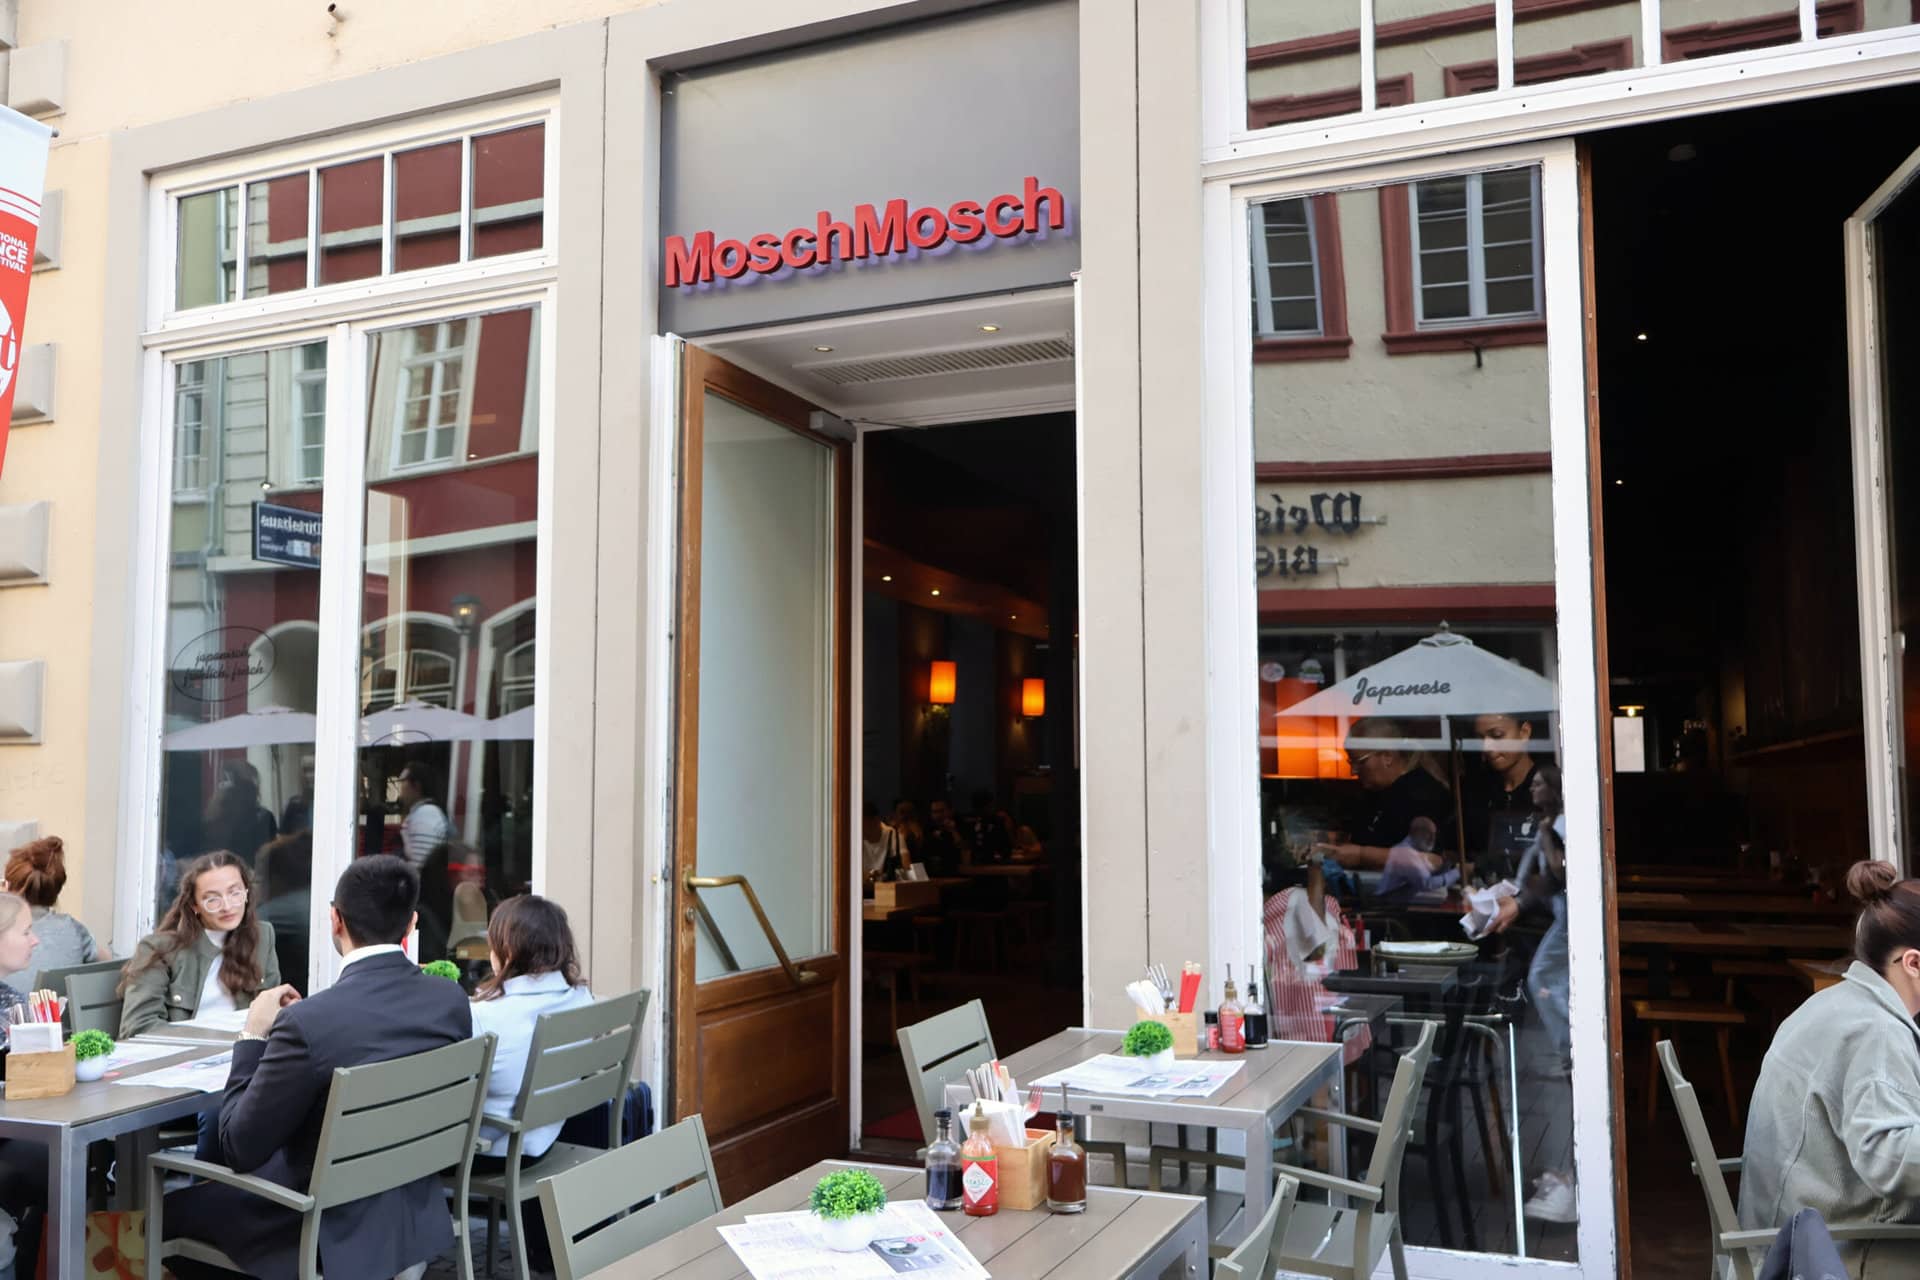 MoschMosch - Japanese restaurant in Heidelberg from the outside